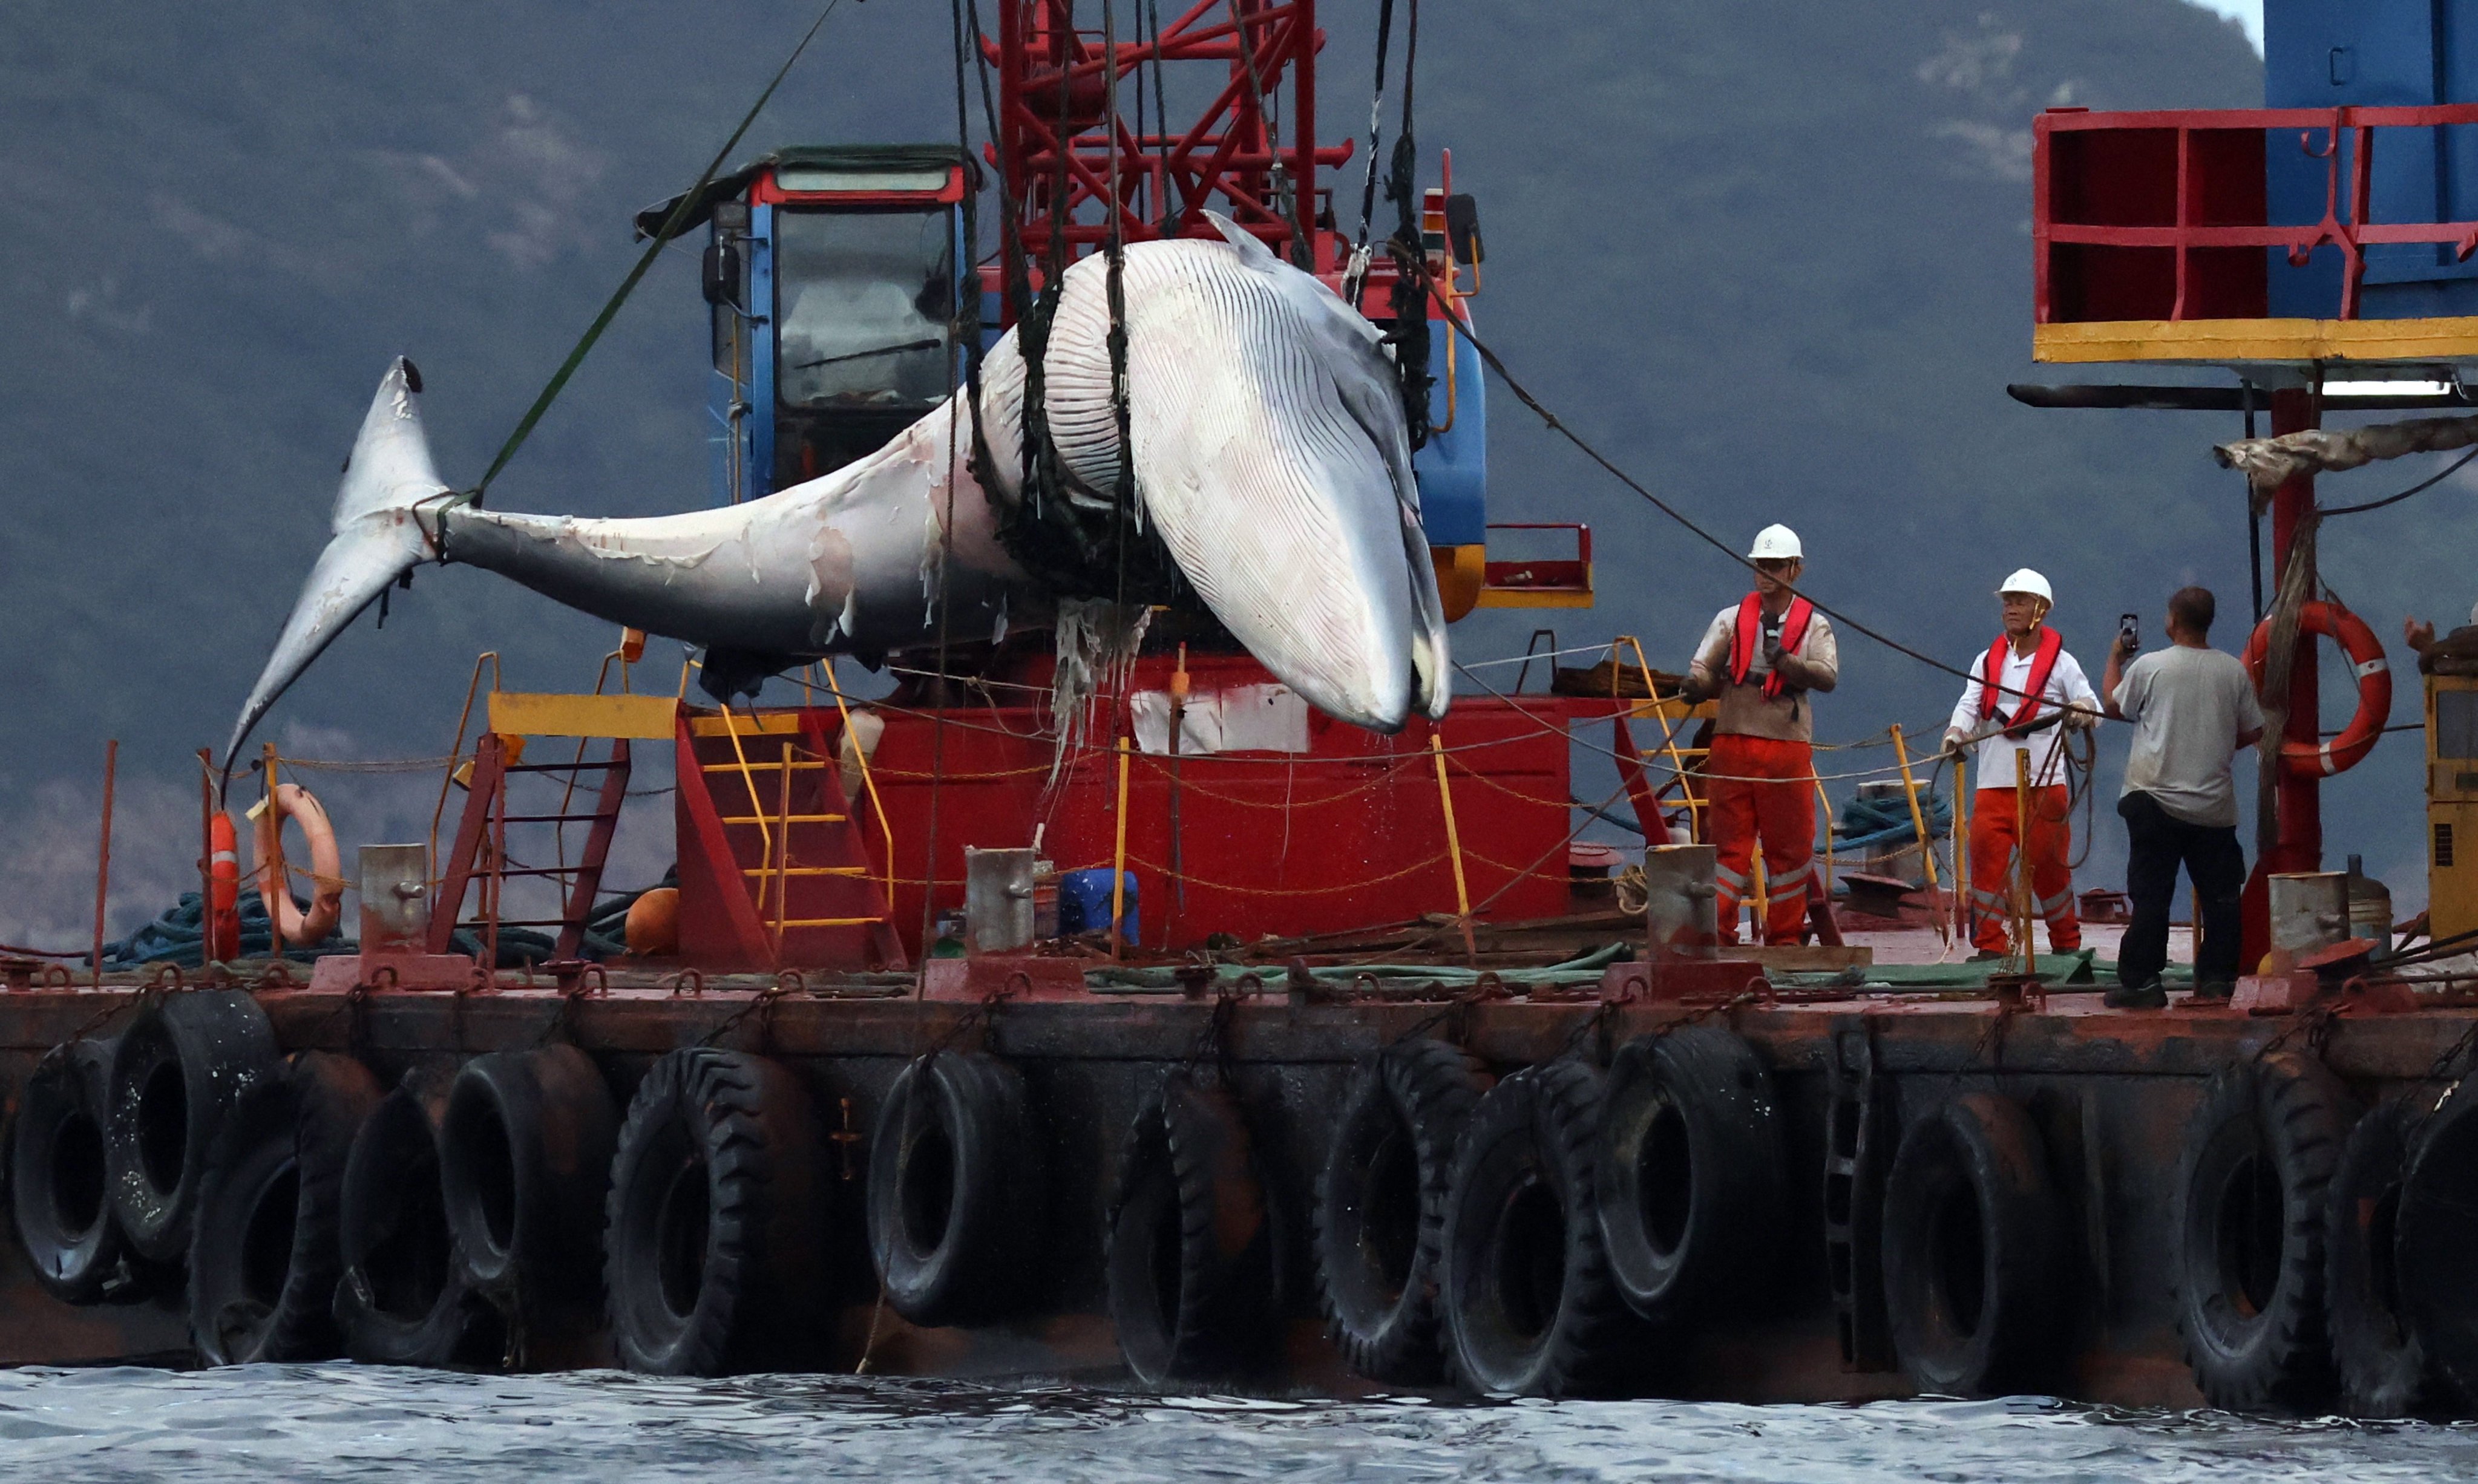 The carcass of the whale is hauled out of the water. The conservation department hopes to have a concrete plan and timeline on a whale-watching ban by the third quarter of this year. Photo: May Tse